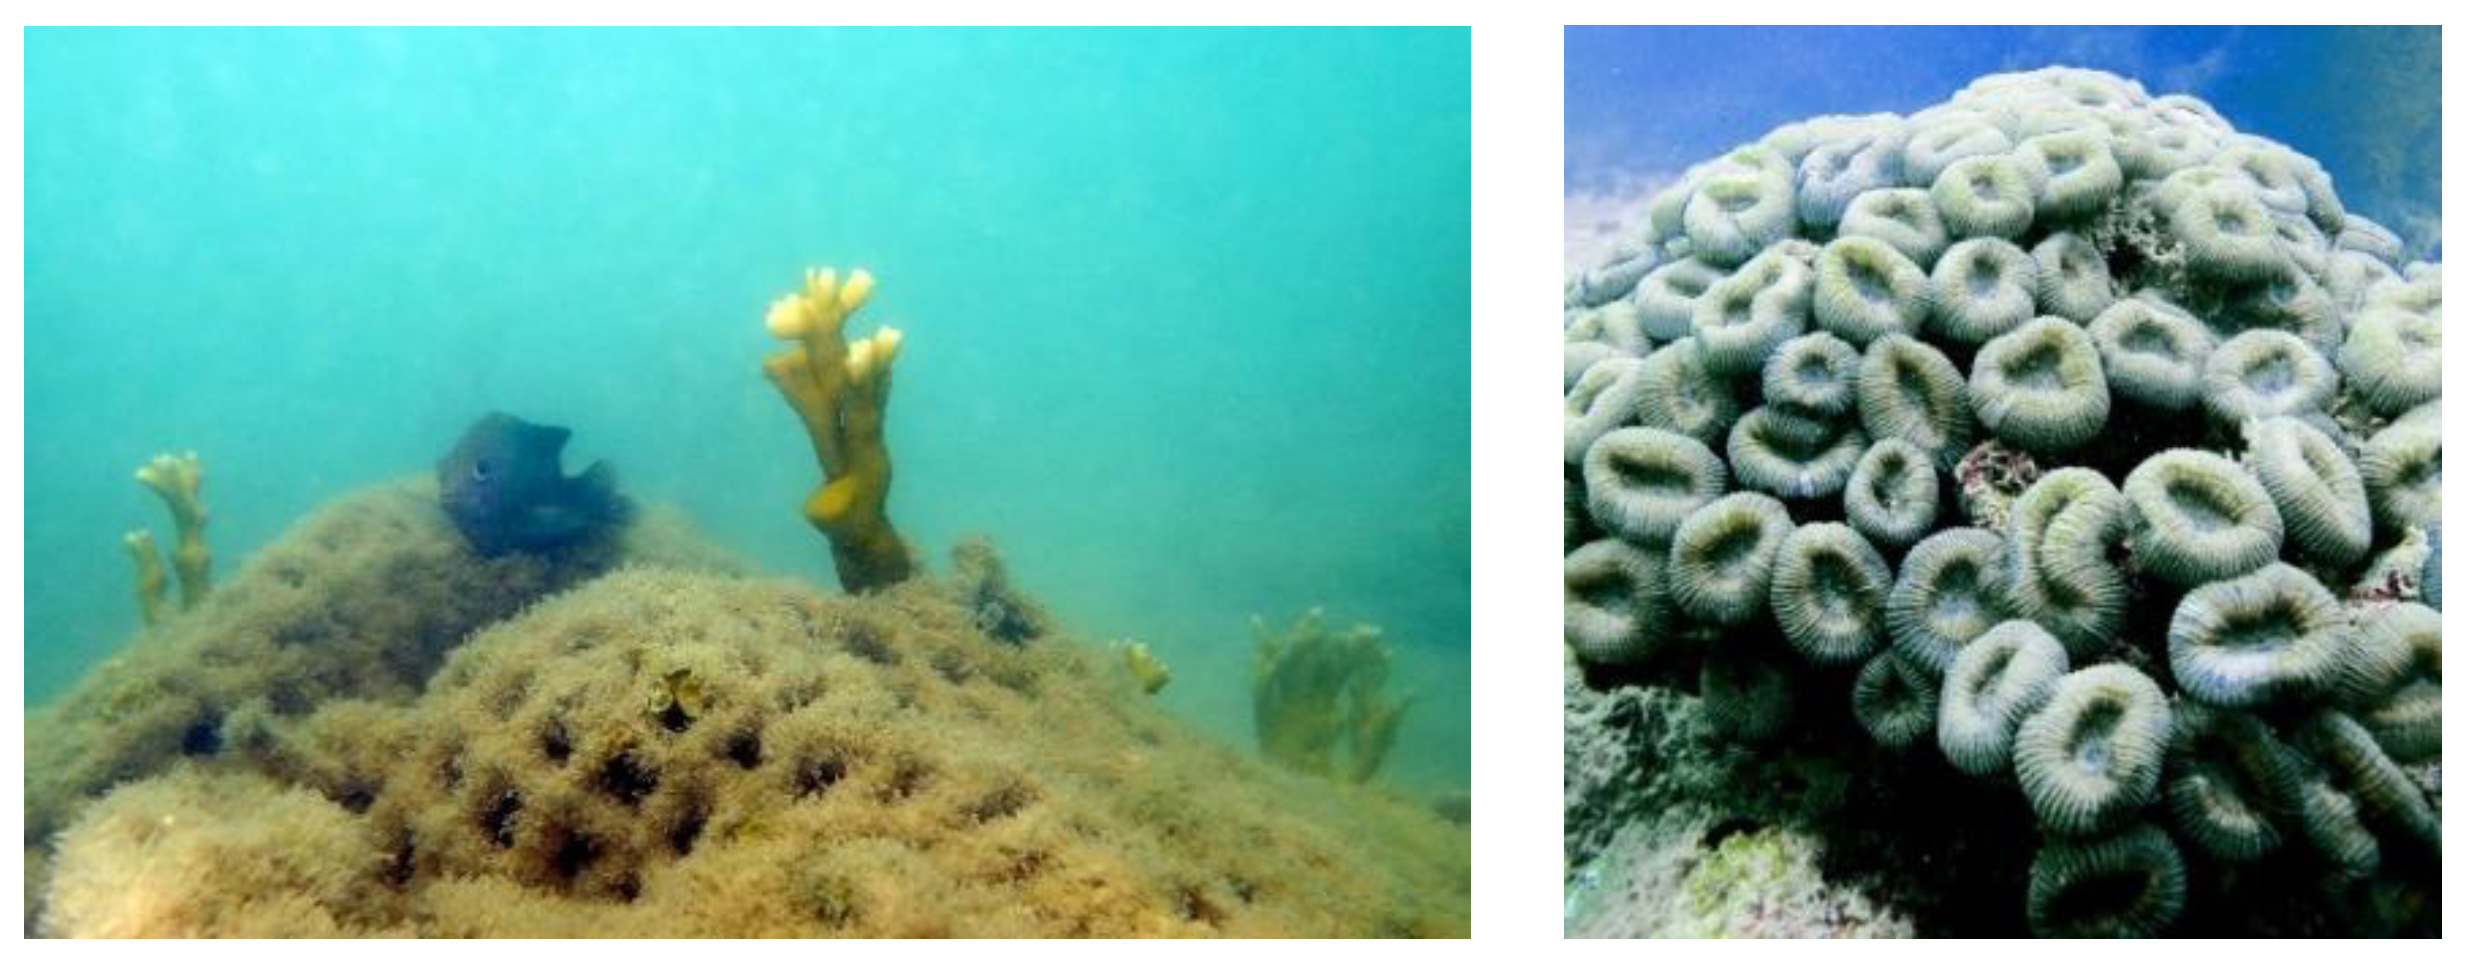 Human impacts are 'decoupling' coral reef ecosystems